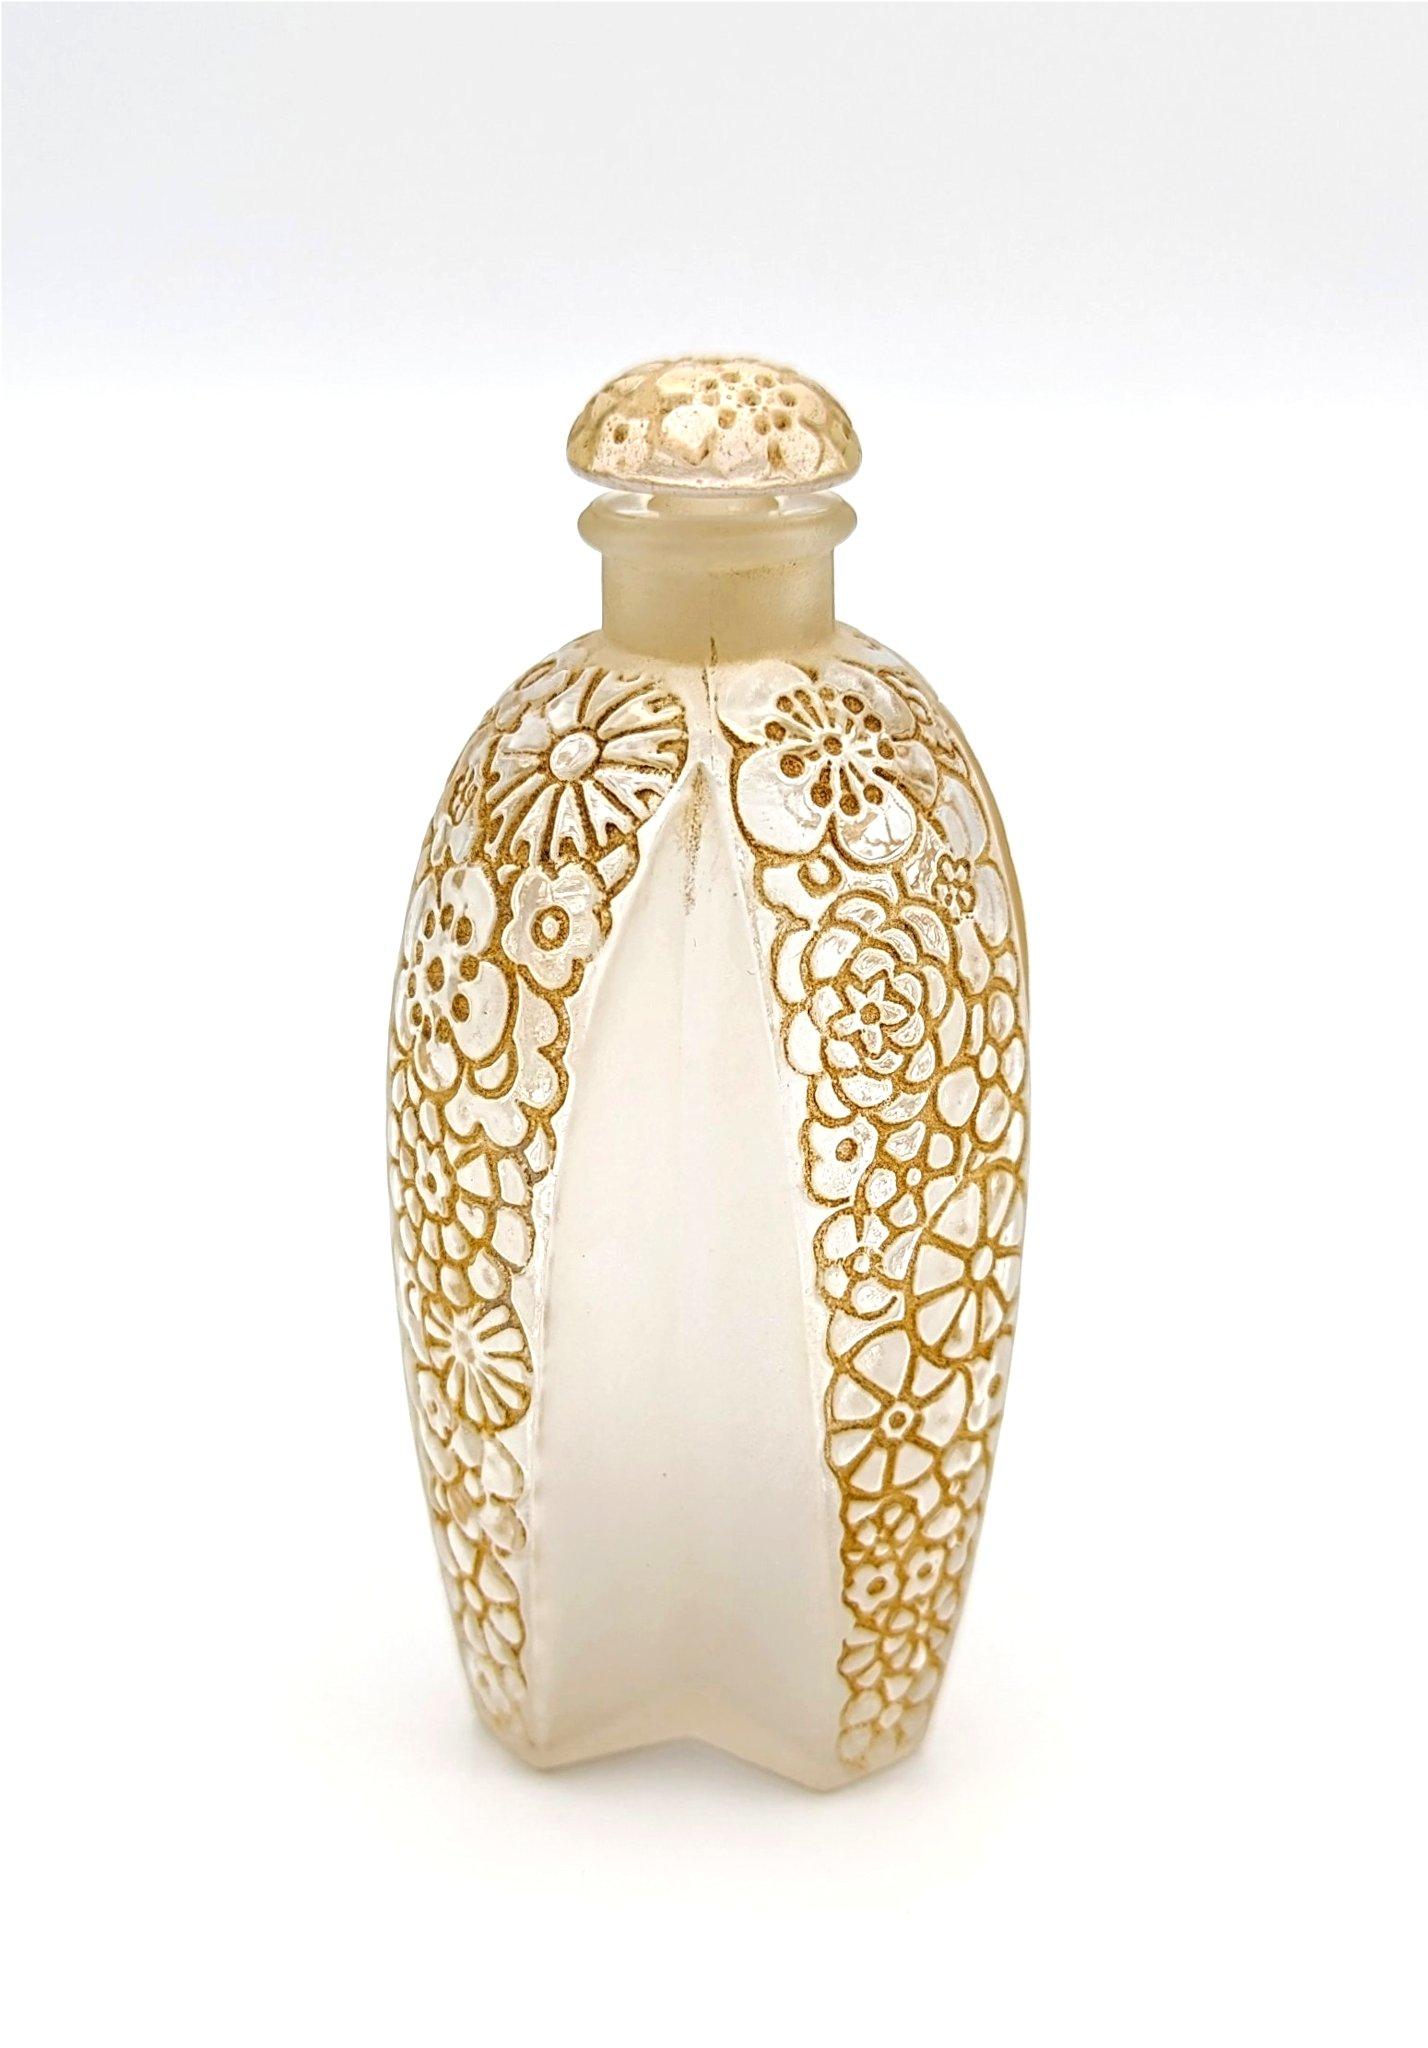 A great design by René Lalique from 1929 for an art deco perfume bottle for the perfume company Gabilla. 